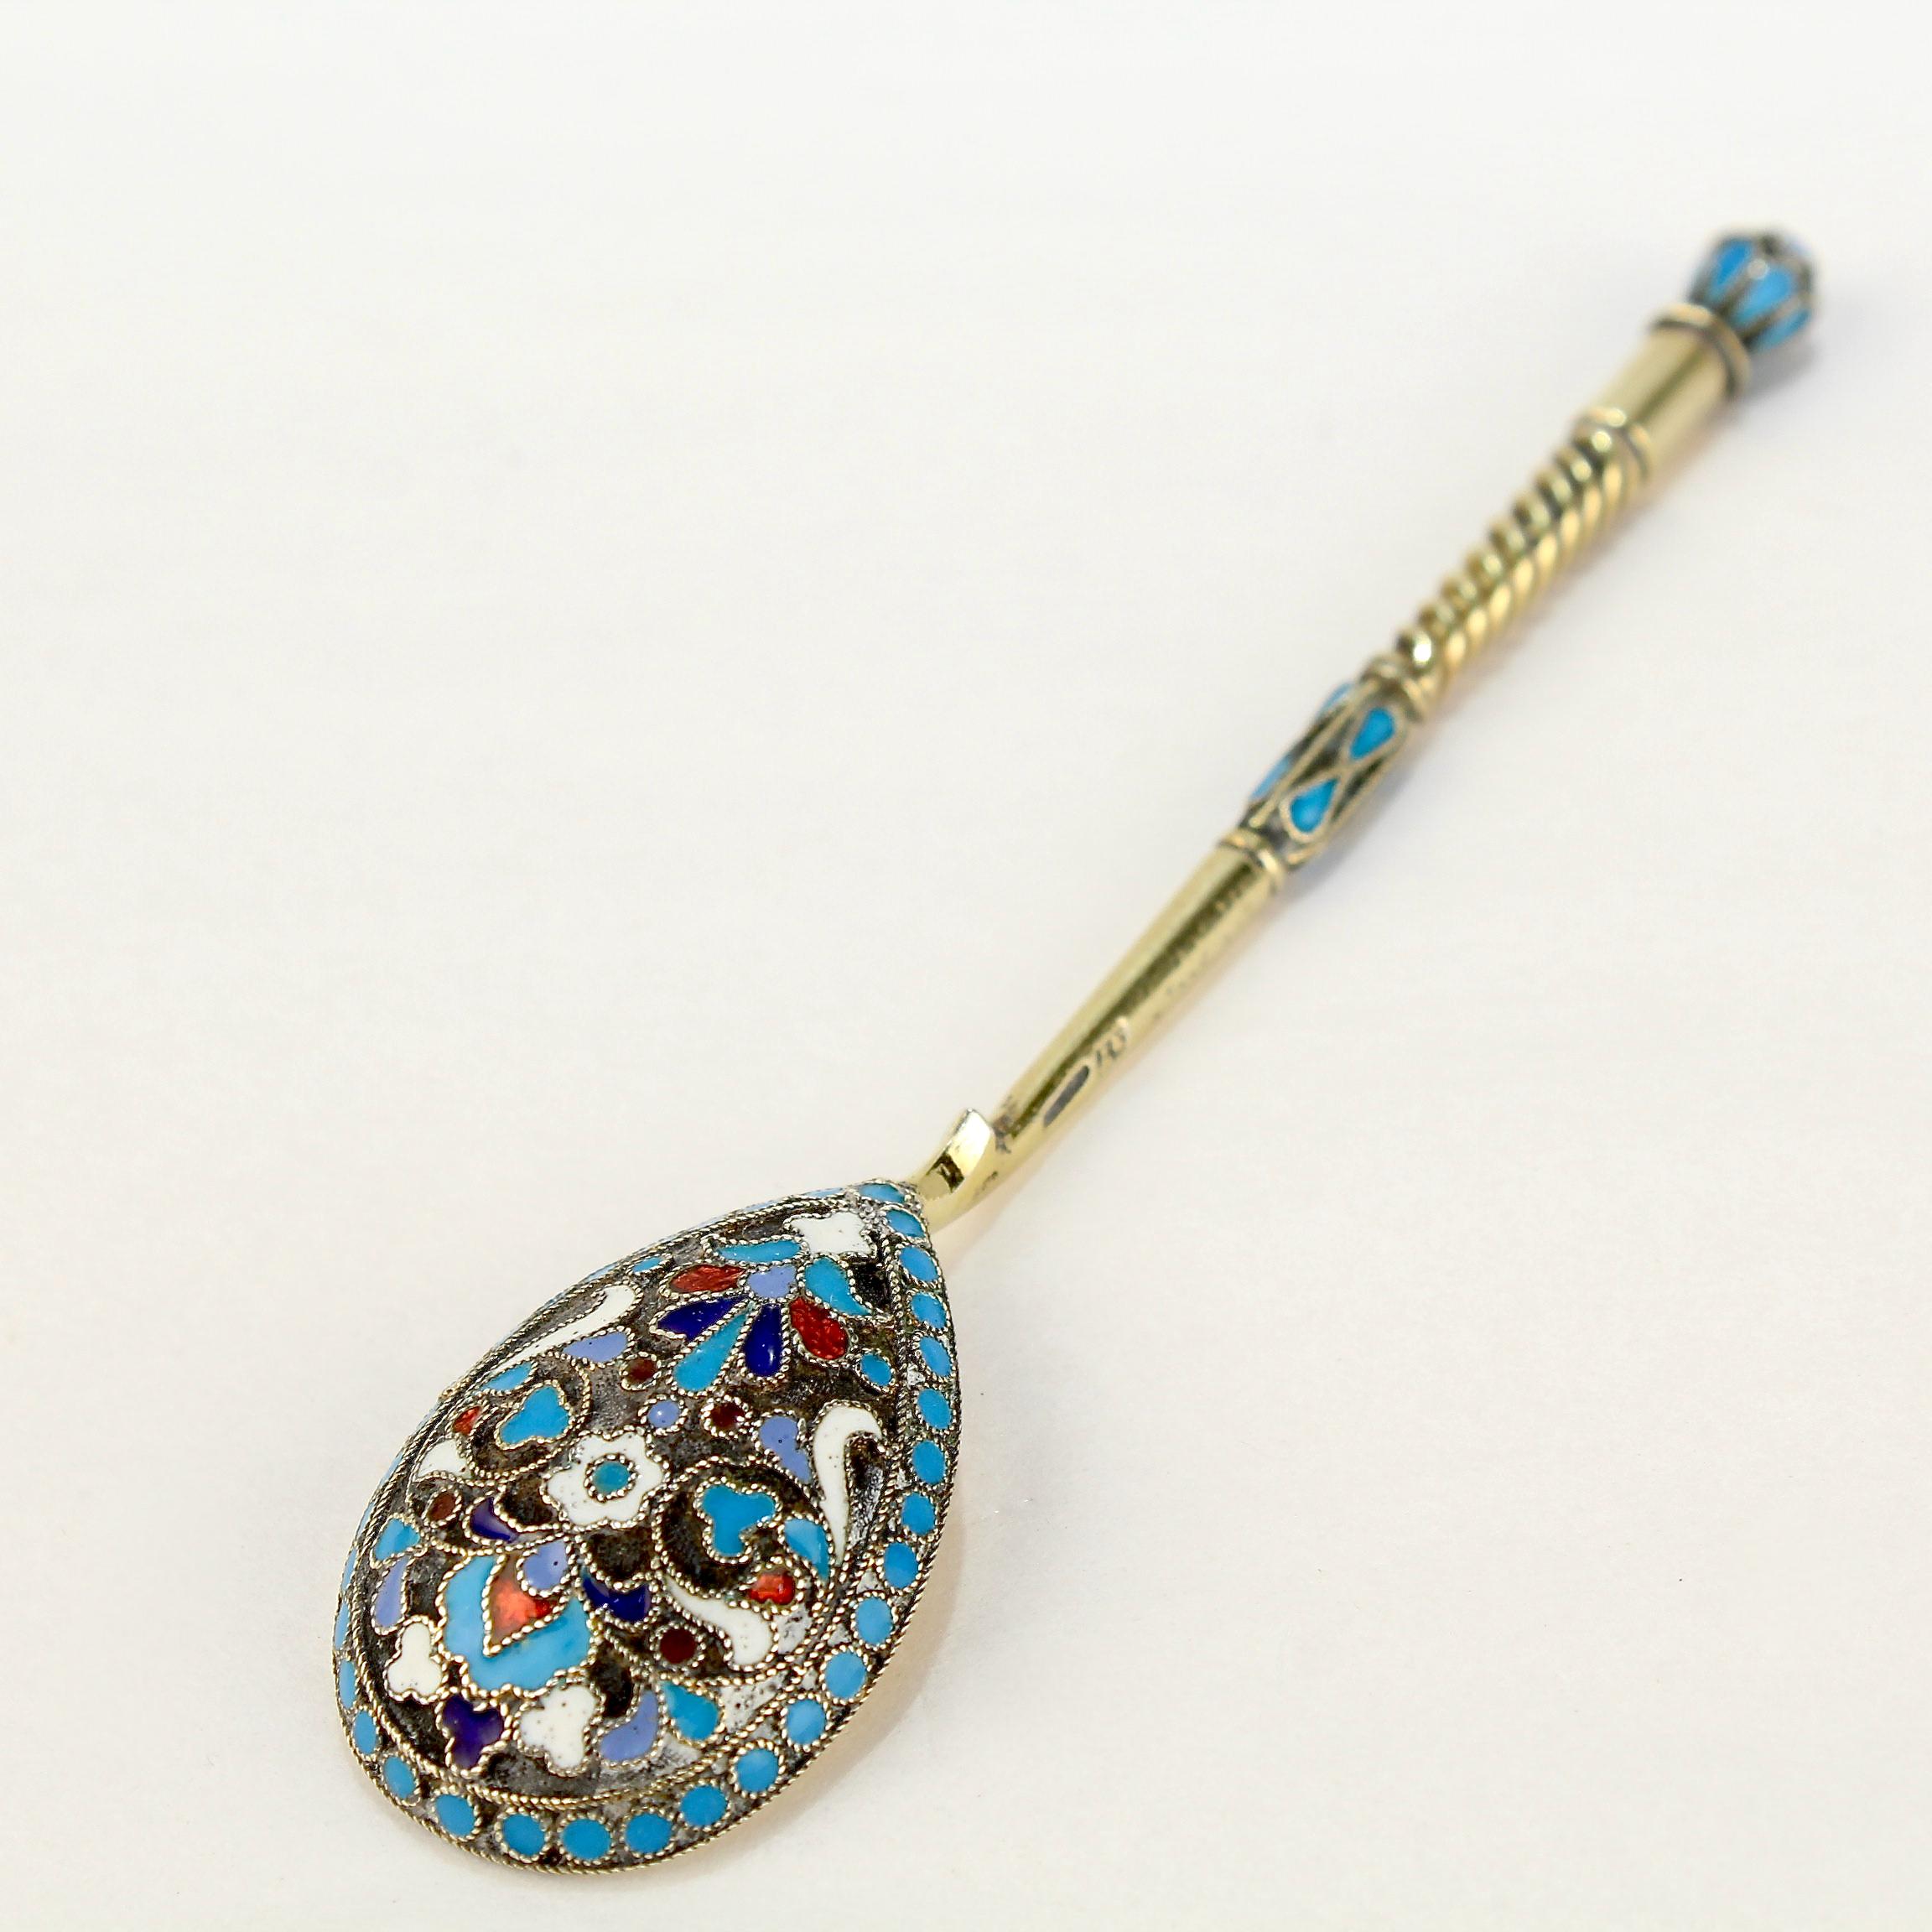 A very fine antique Russian tea or kvosh spoon.

Additional Details:
Possibly by Alexsander Krivovichev. (The maker's mark is partly obliterated).

With polychrome cloisonné enamel decoration to both the front and reverse.

Simply a wonderful piece